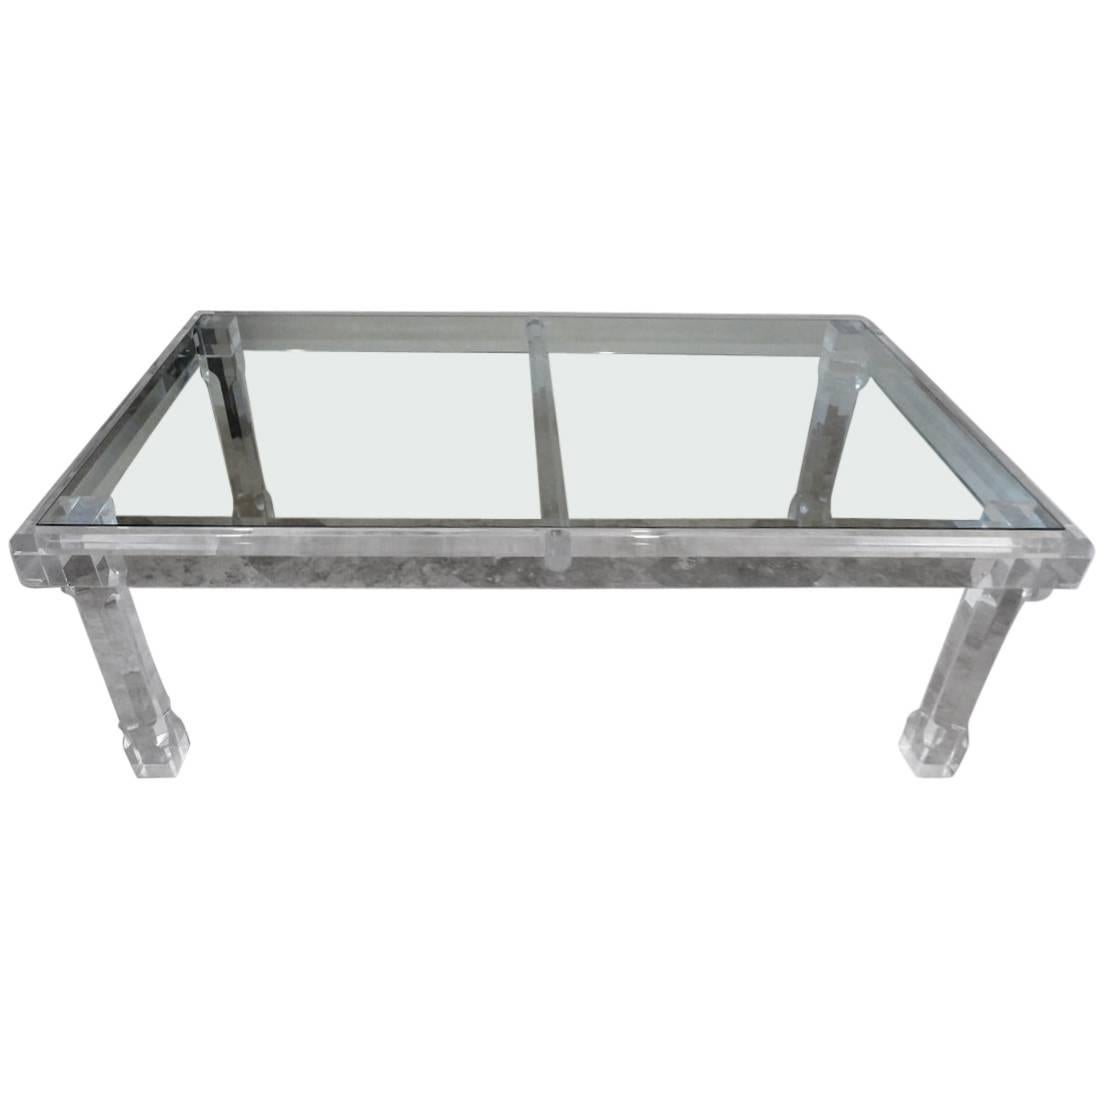 Massive Lucite Dining Table For Sale